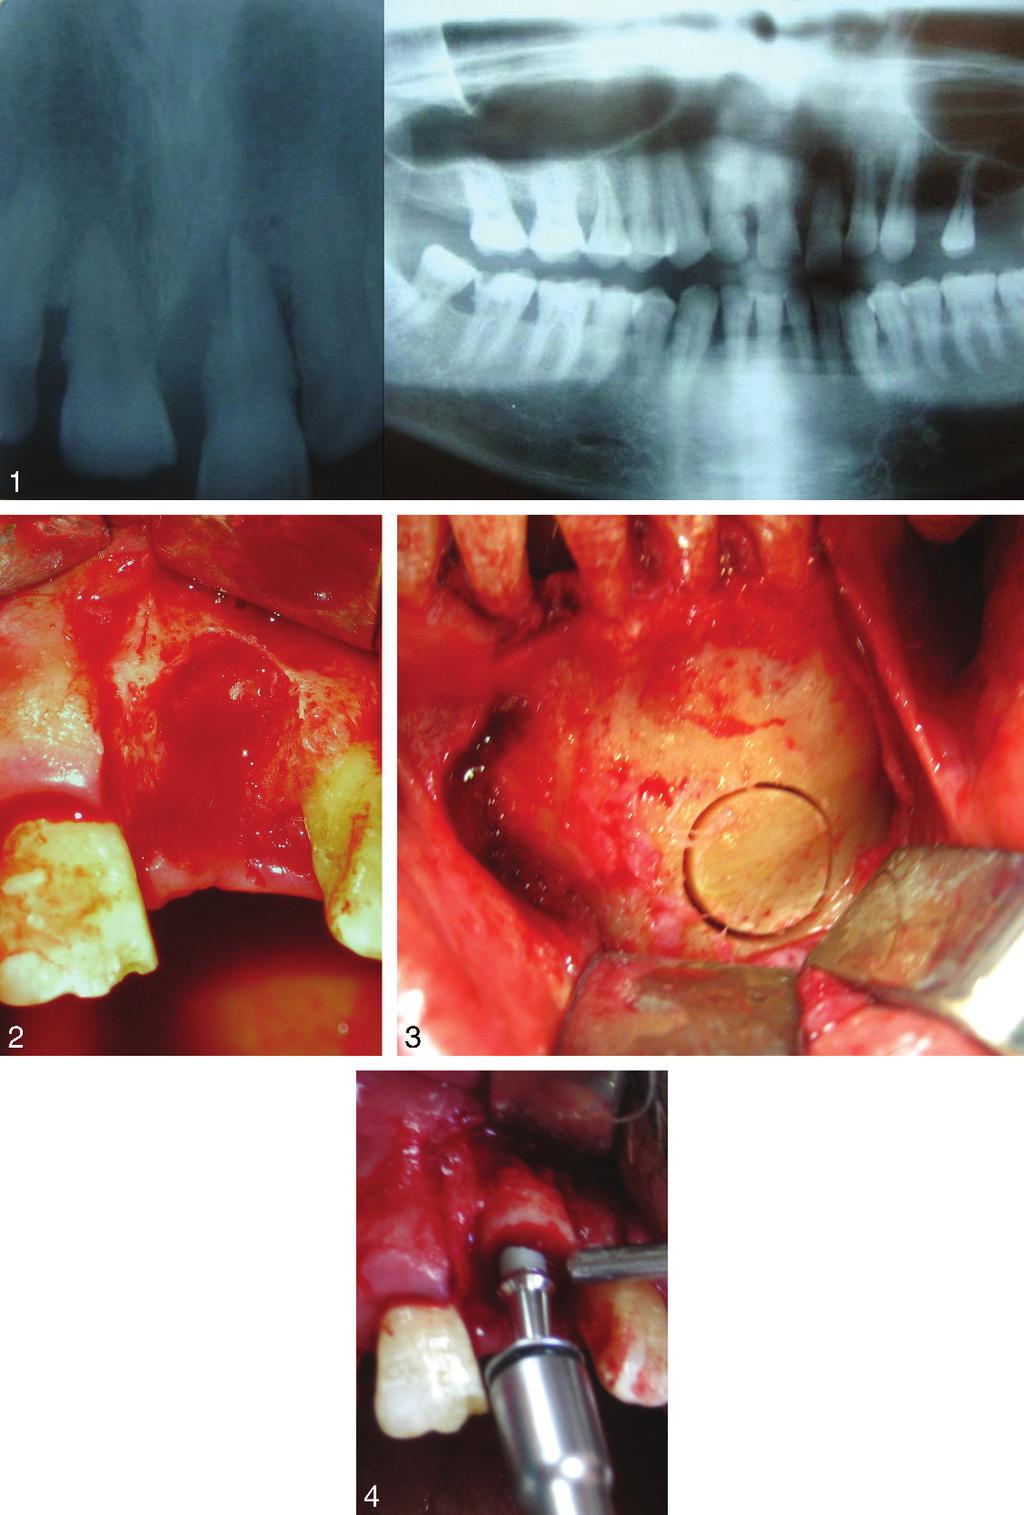 Tekin et al FIGURES 1 4. FIGURE 1. Preoperative radiographic view of the patient. Dramatic bone loss around tooth number 9. FIGURE 2. Vertical and horizontal bone deficiency after extraction.